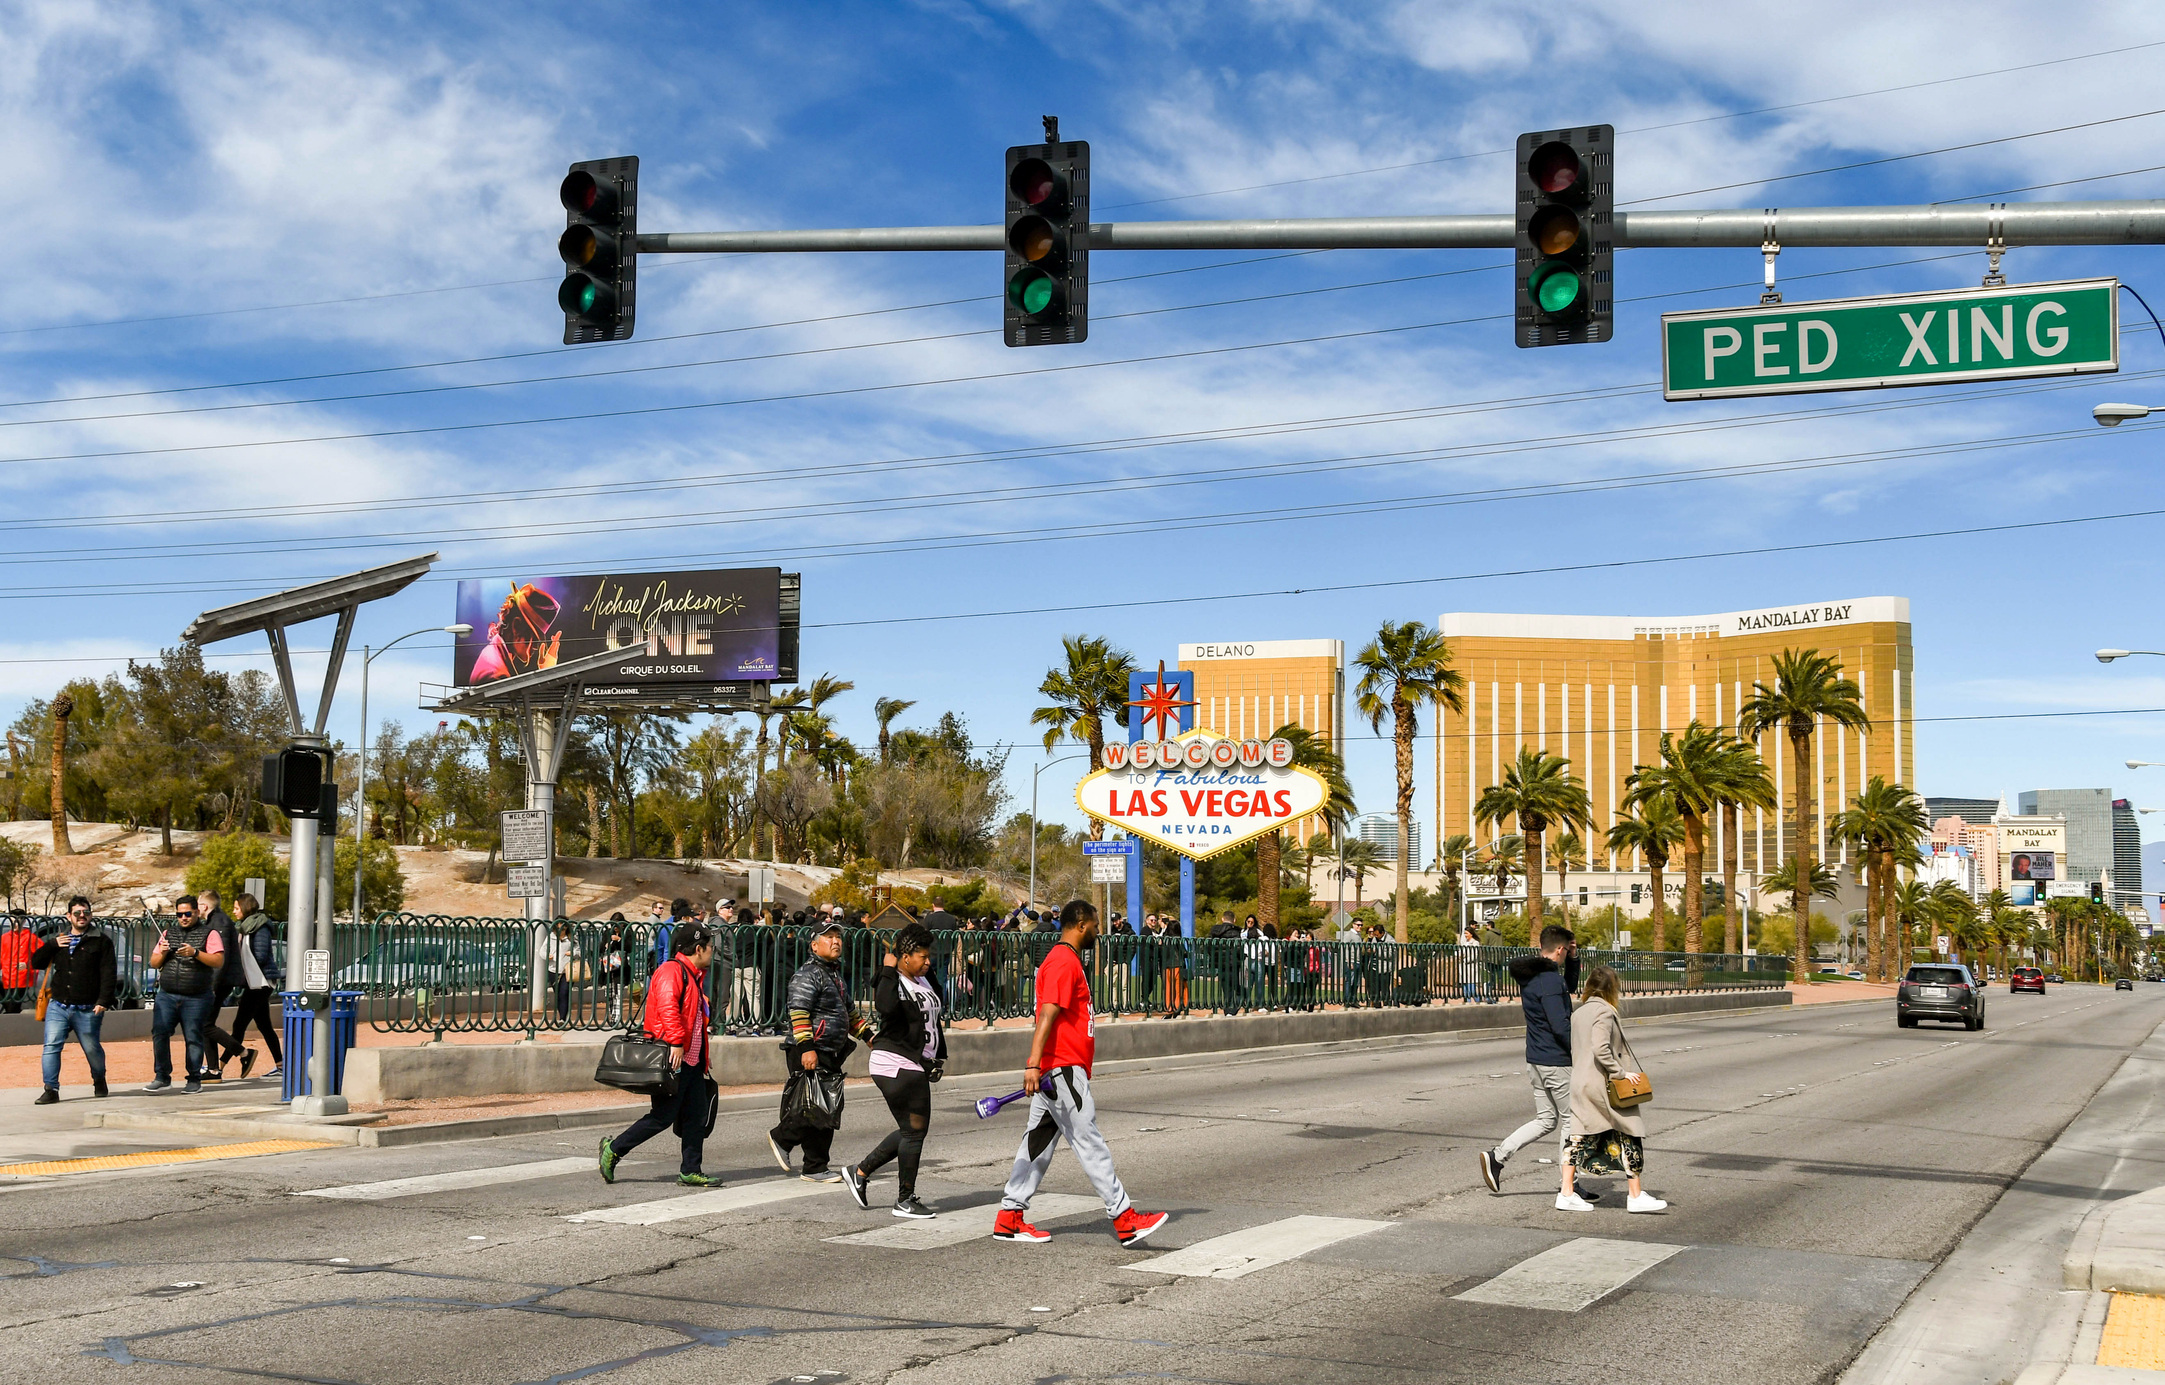 A group of people walking on streets | Nevada Pedestrian Law